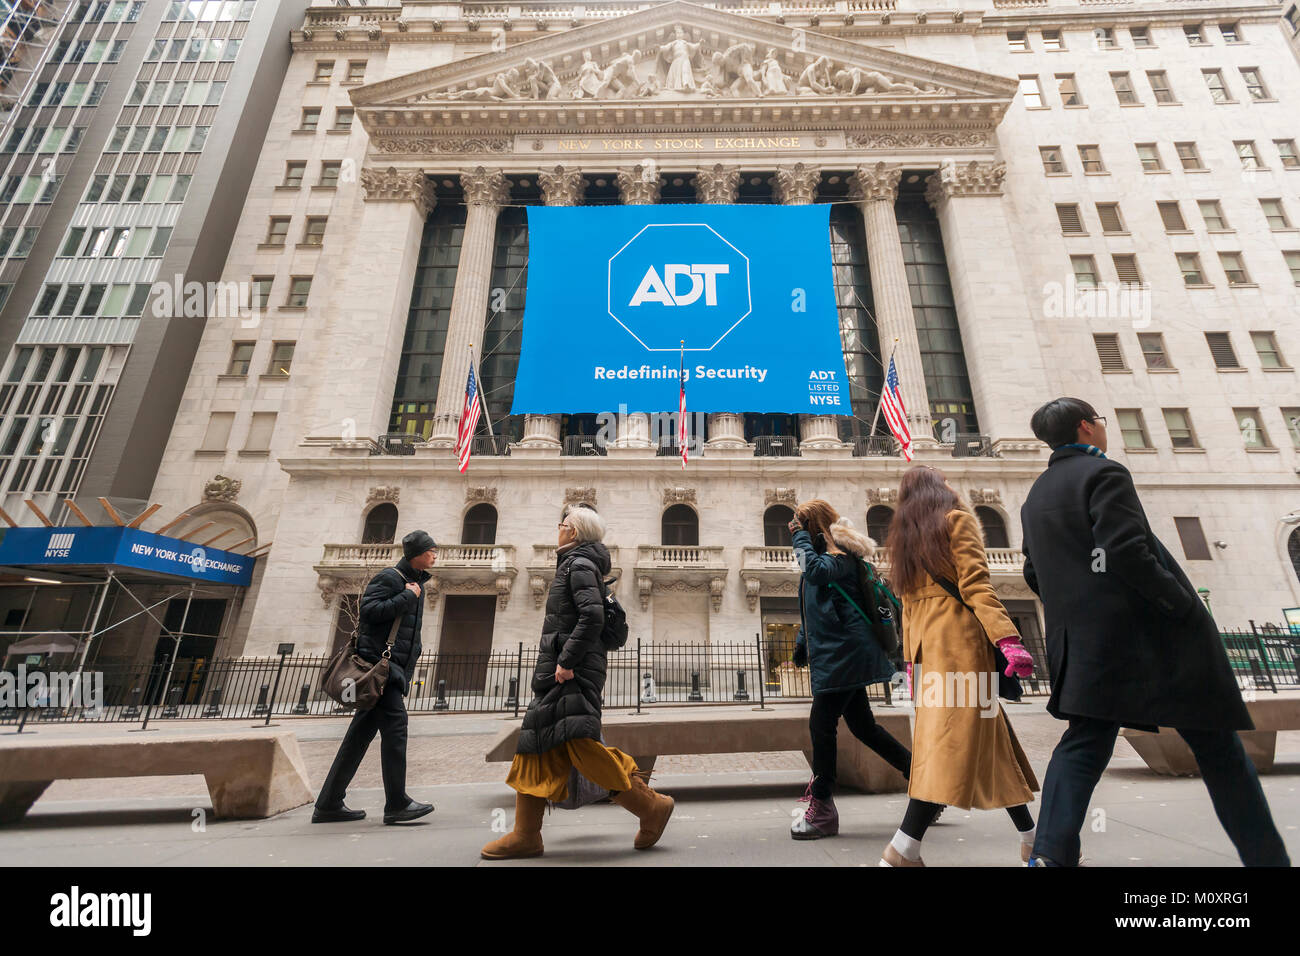 The New York Stock Exchange is decorated for the first day of trading for  ADT, seen on Friday, January 19, 2018. ADT, Inc. markets home and business security products and was bought by private-equity firm Apollo Global Management in 2016 and now is returning it to a public company.  (Â© Richard B. Levine) Stock Photo